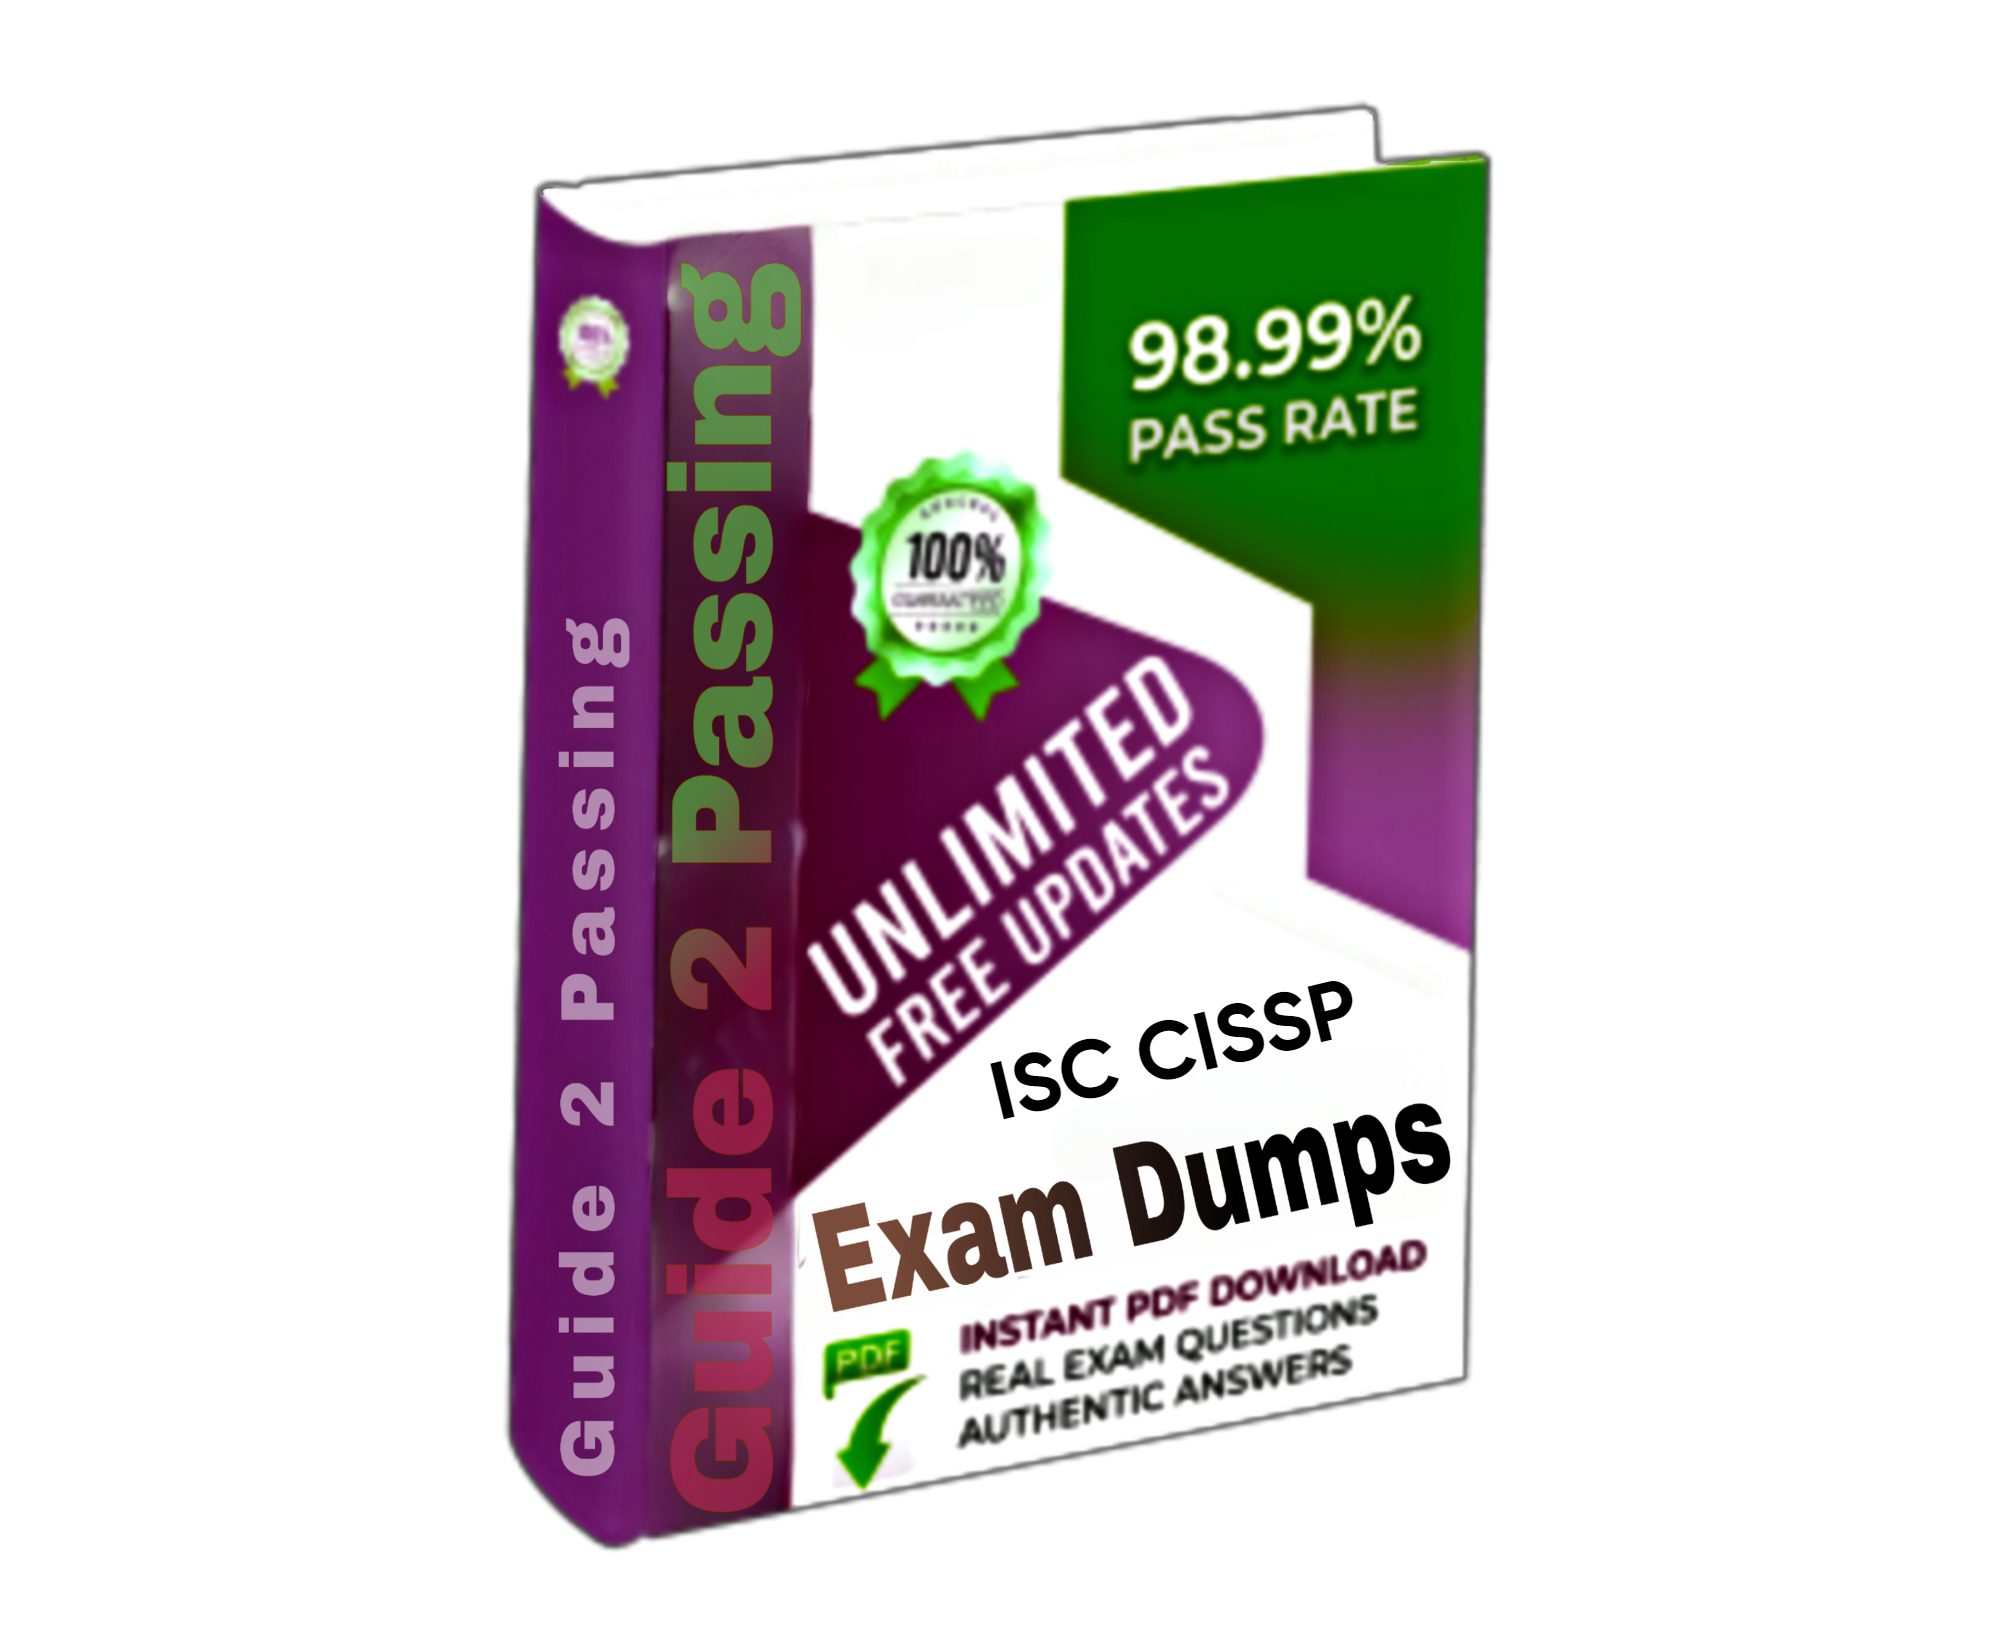 Pass Your CISSP Exam Dumps From Guide 2 Passing